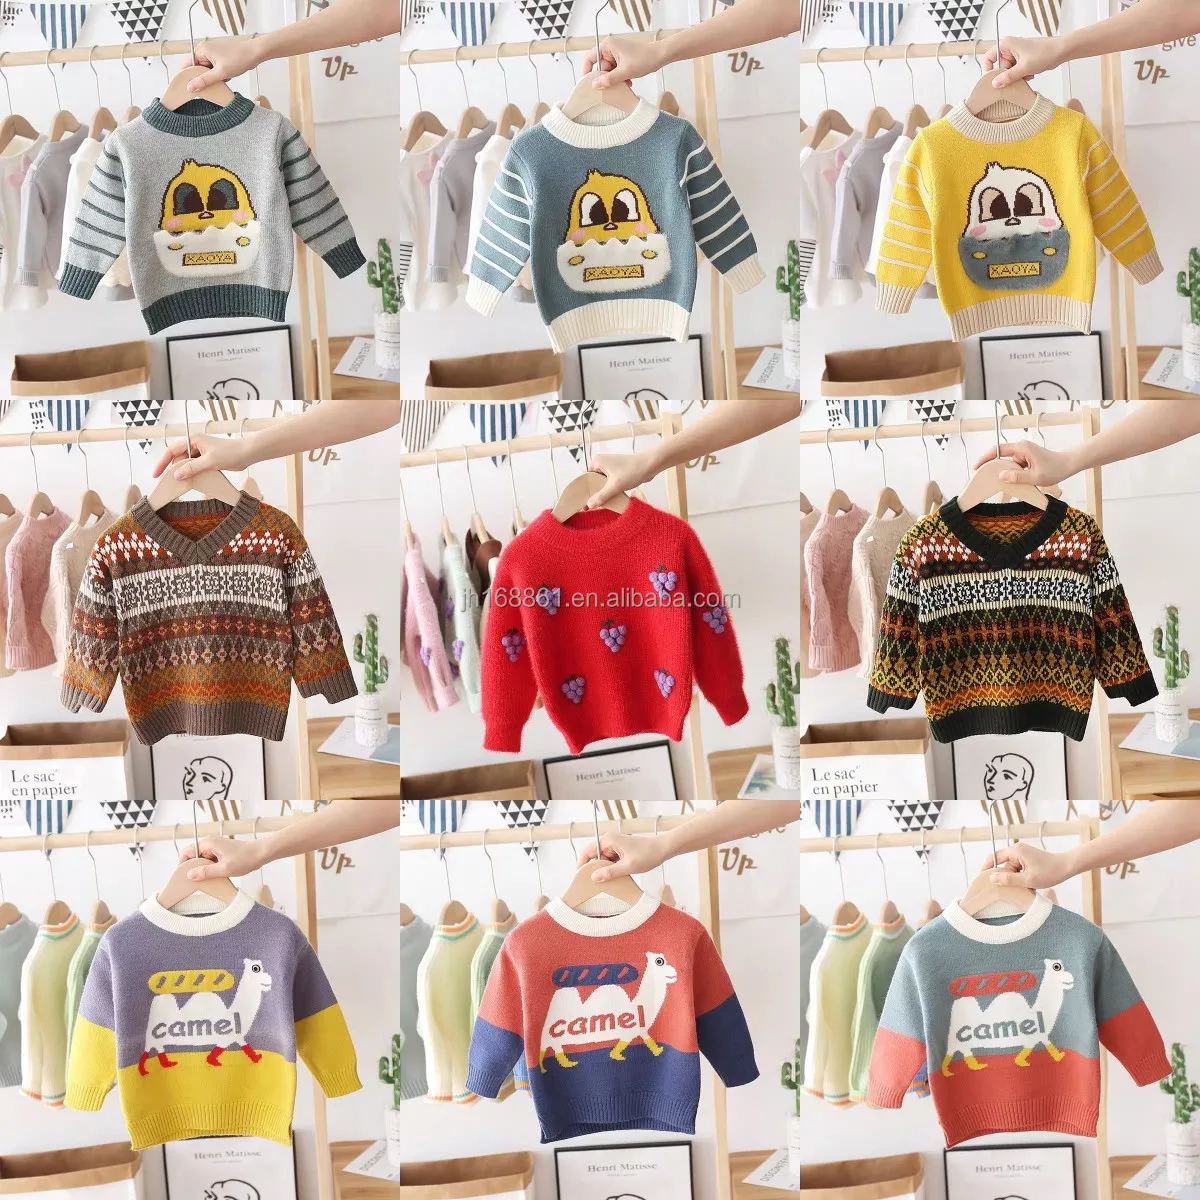 

2021 men's sweater autumn/winter knit sweater unisex sweater children's turtleneck pullover wholesale at low prices, Picture